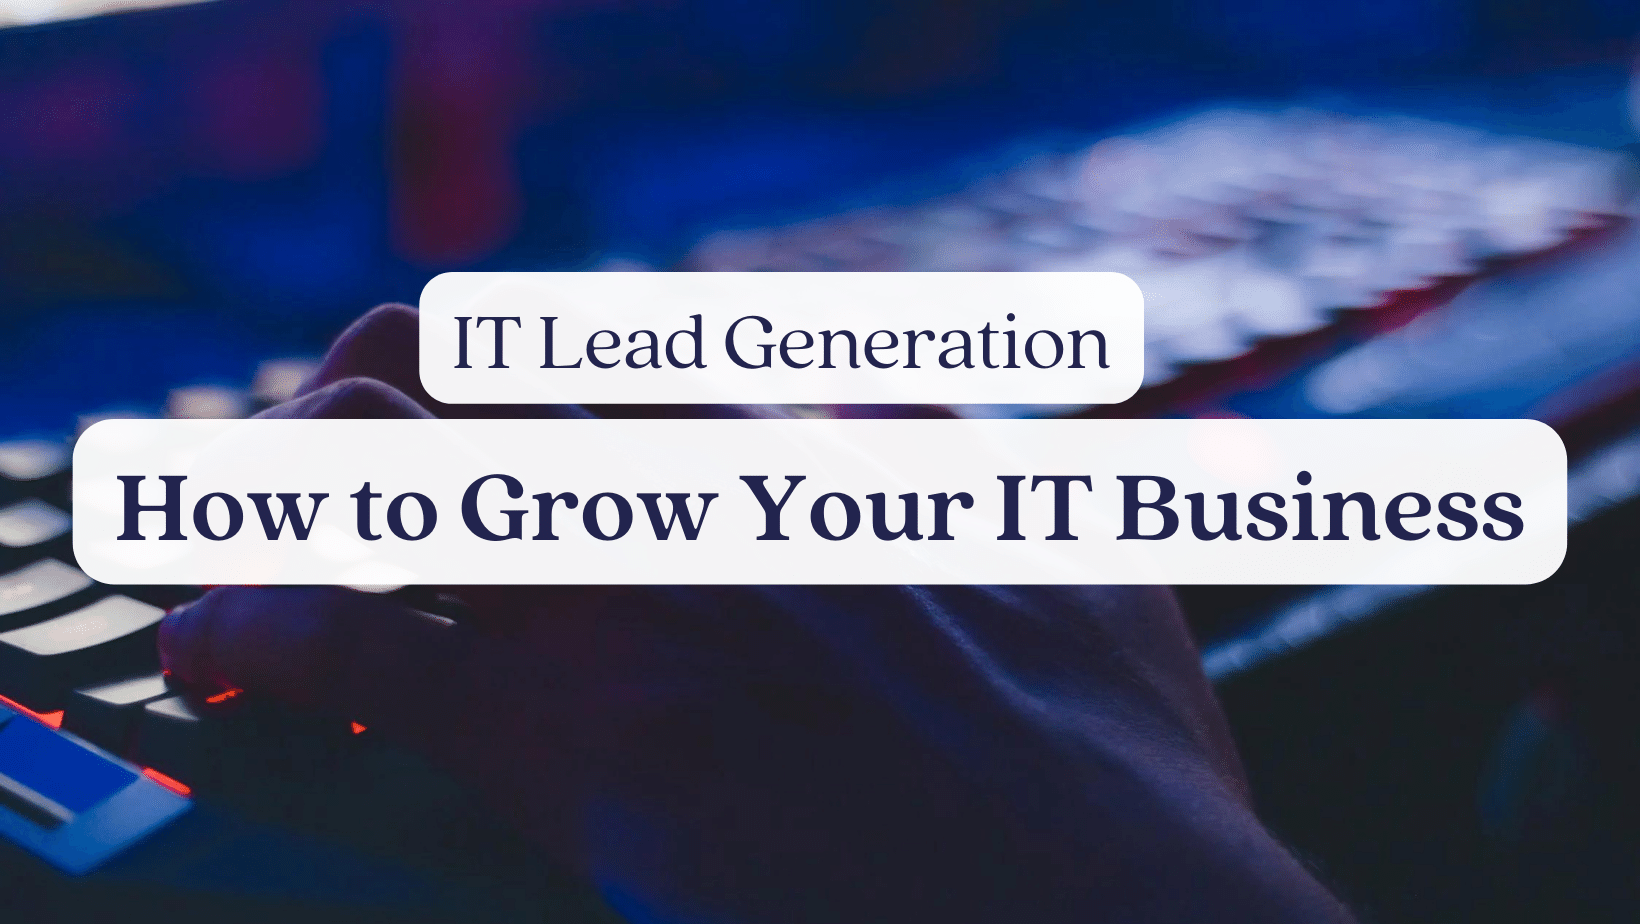 IT Lead Generation: How to Grow Your IT Business